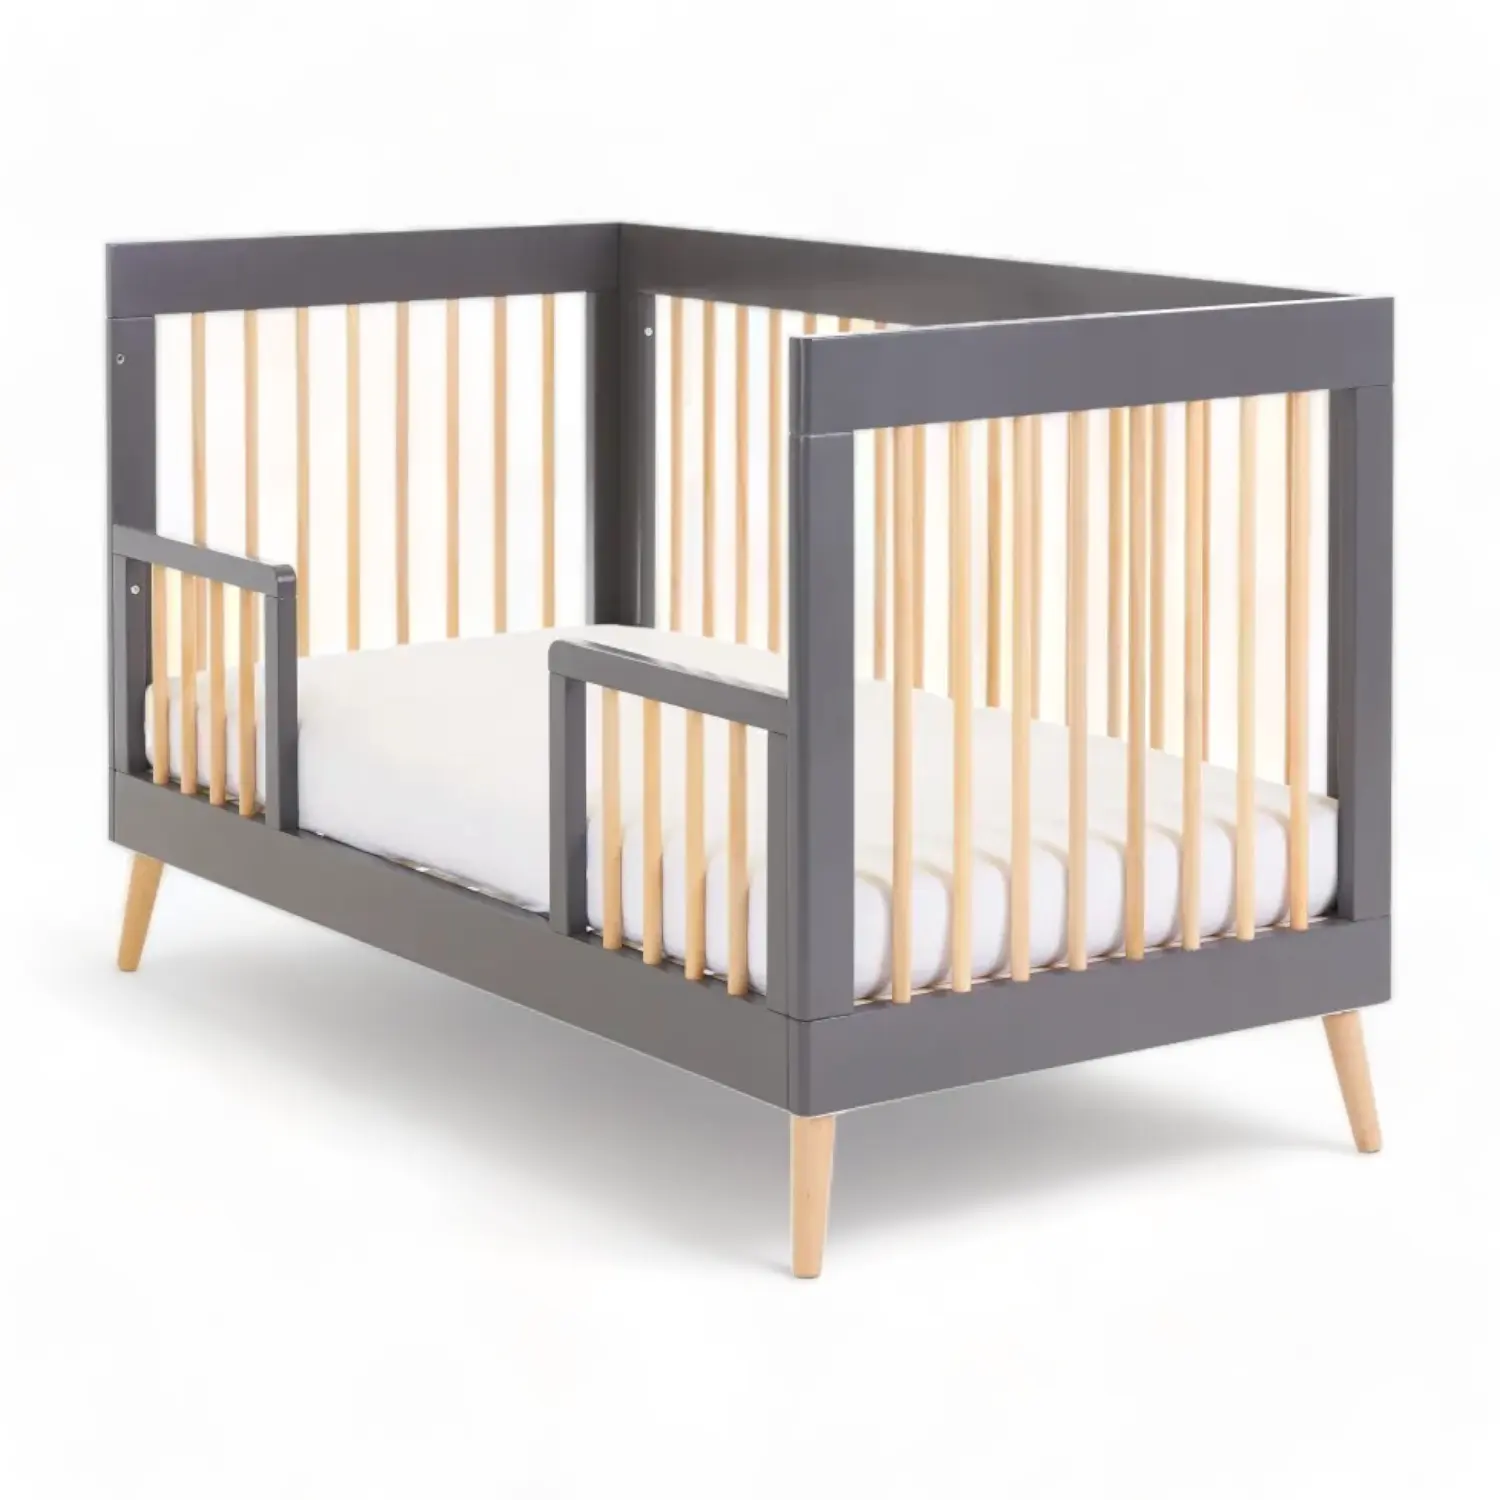 Luxury Solid Wood Baby Crib Beds in Modern Style Children beds for Mattress size 140x70 cm Wooden Bed for Child - Obane